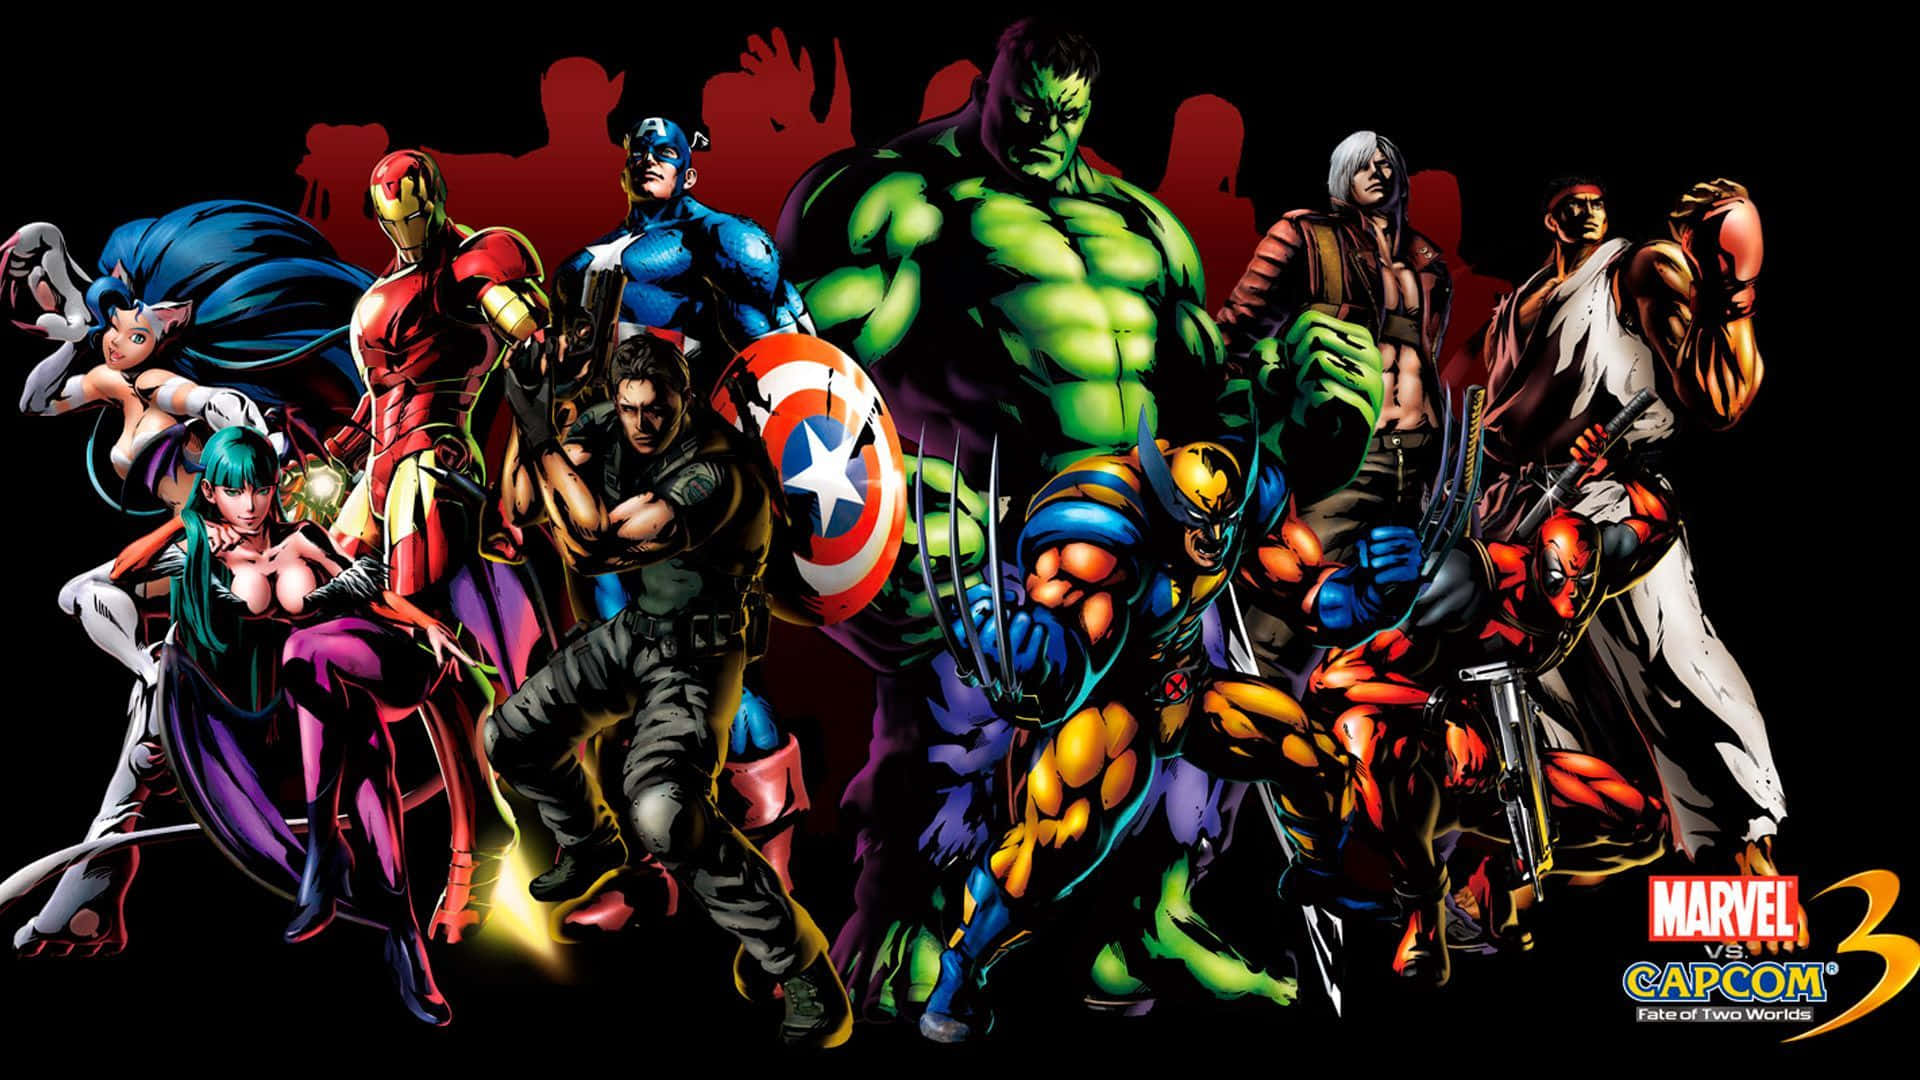 Epic Battle of Superheroes in an Animated Movie Wallpaper